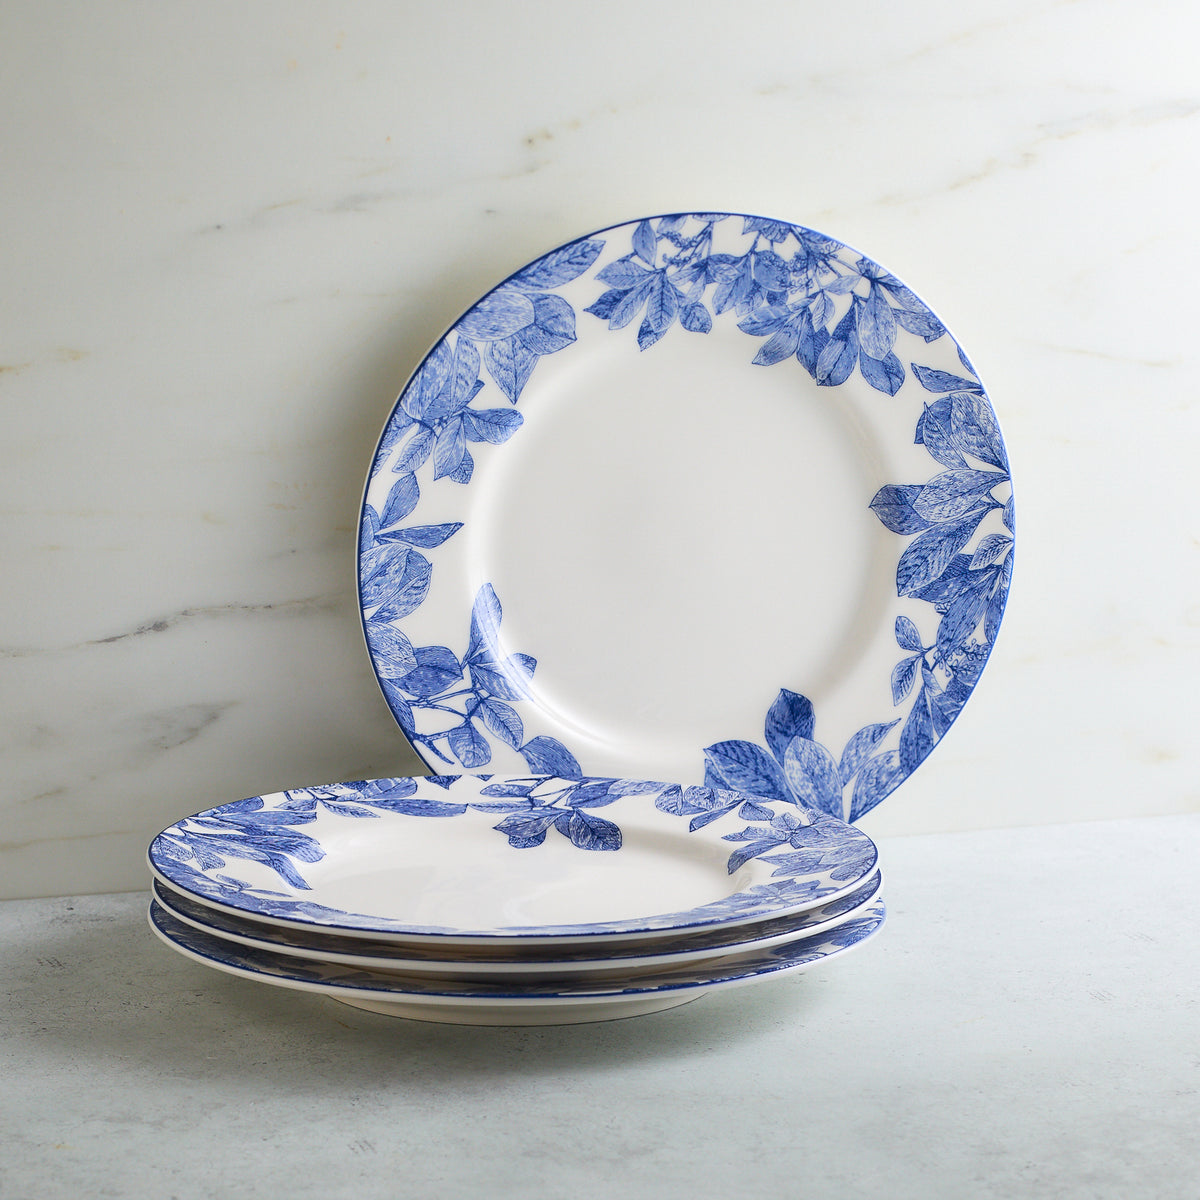 A stack of four Arbor Rimmed Salad Plates by Caskata Artisanal Home with blue leafy patterns on the edges, placed on a light gray surface against a marble background, evokes an heirloom feel.